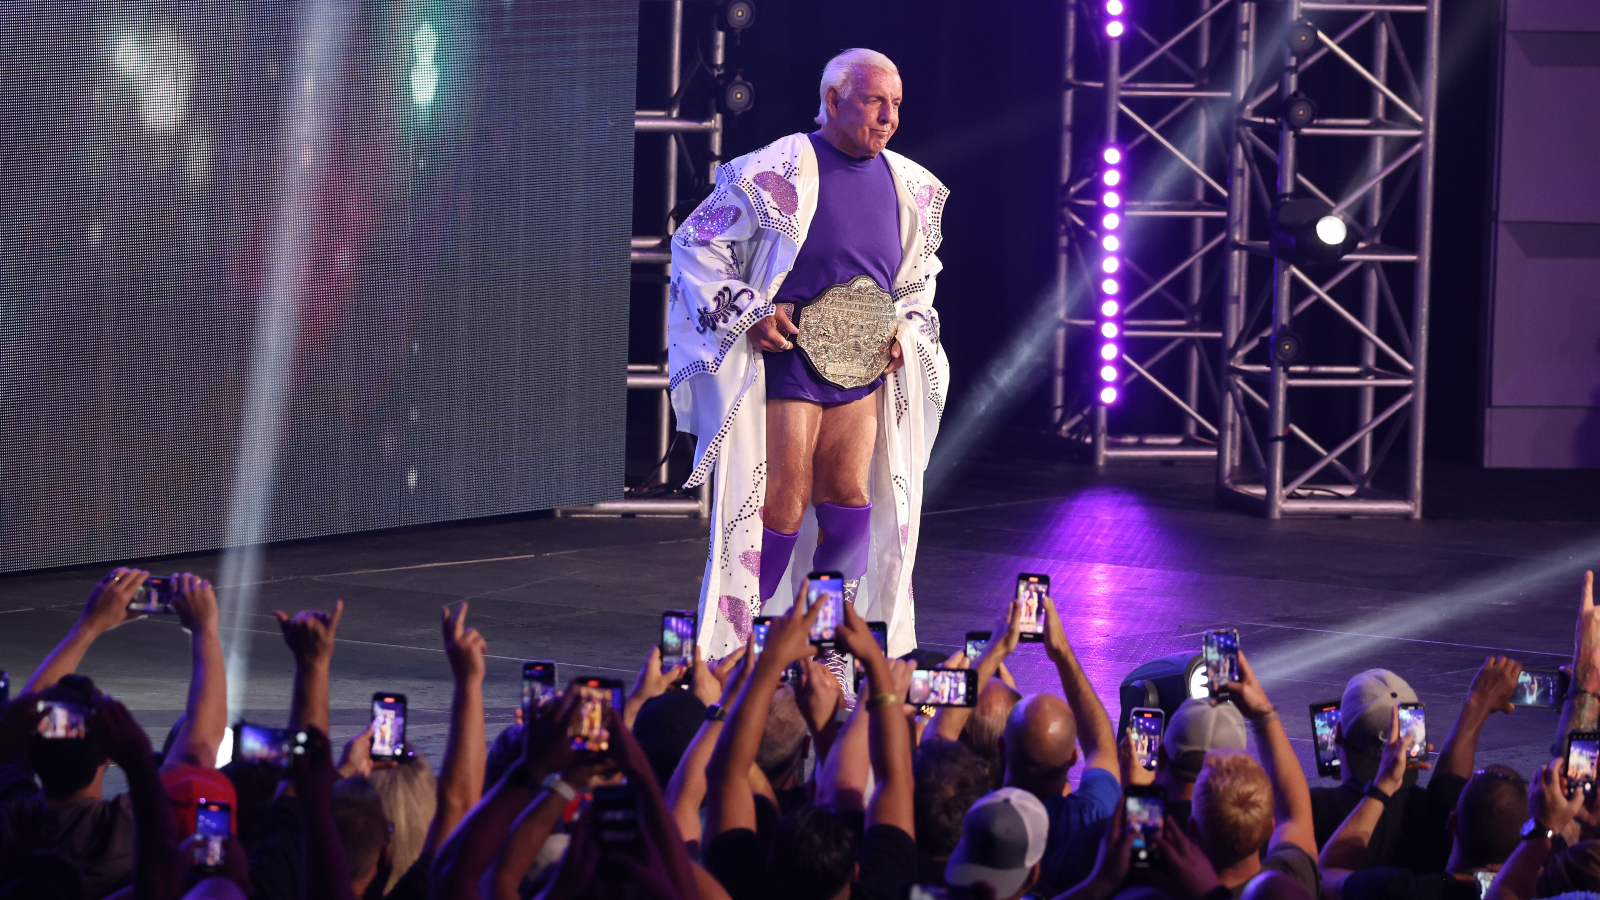 WWE Legend Ric Flair Says He Had Heart Attack In Final Match